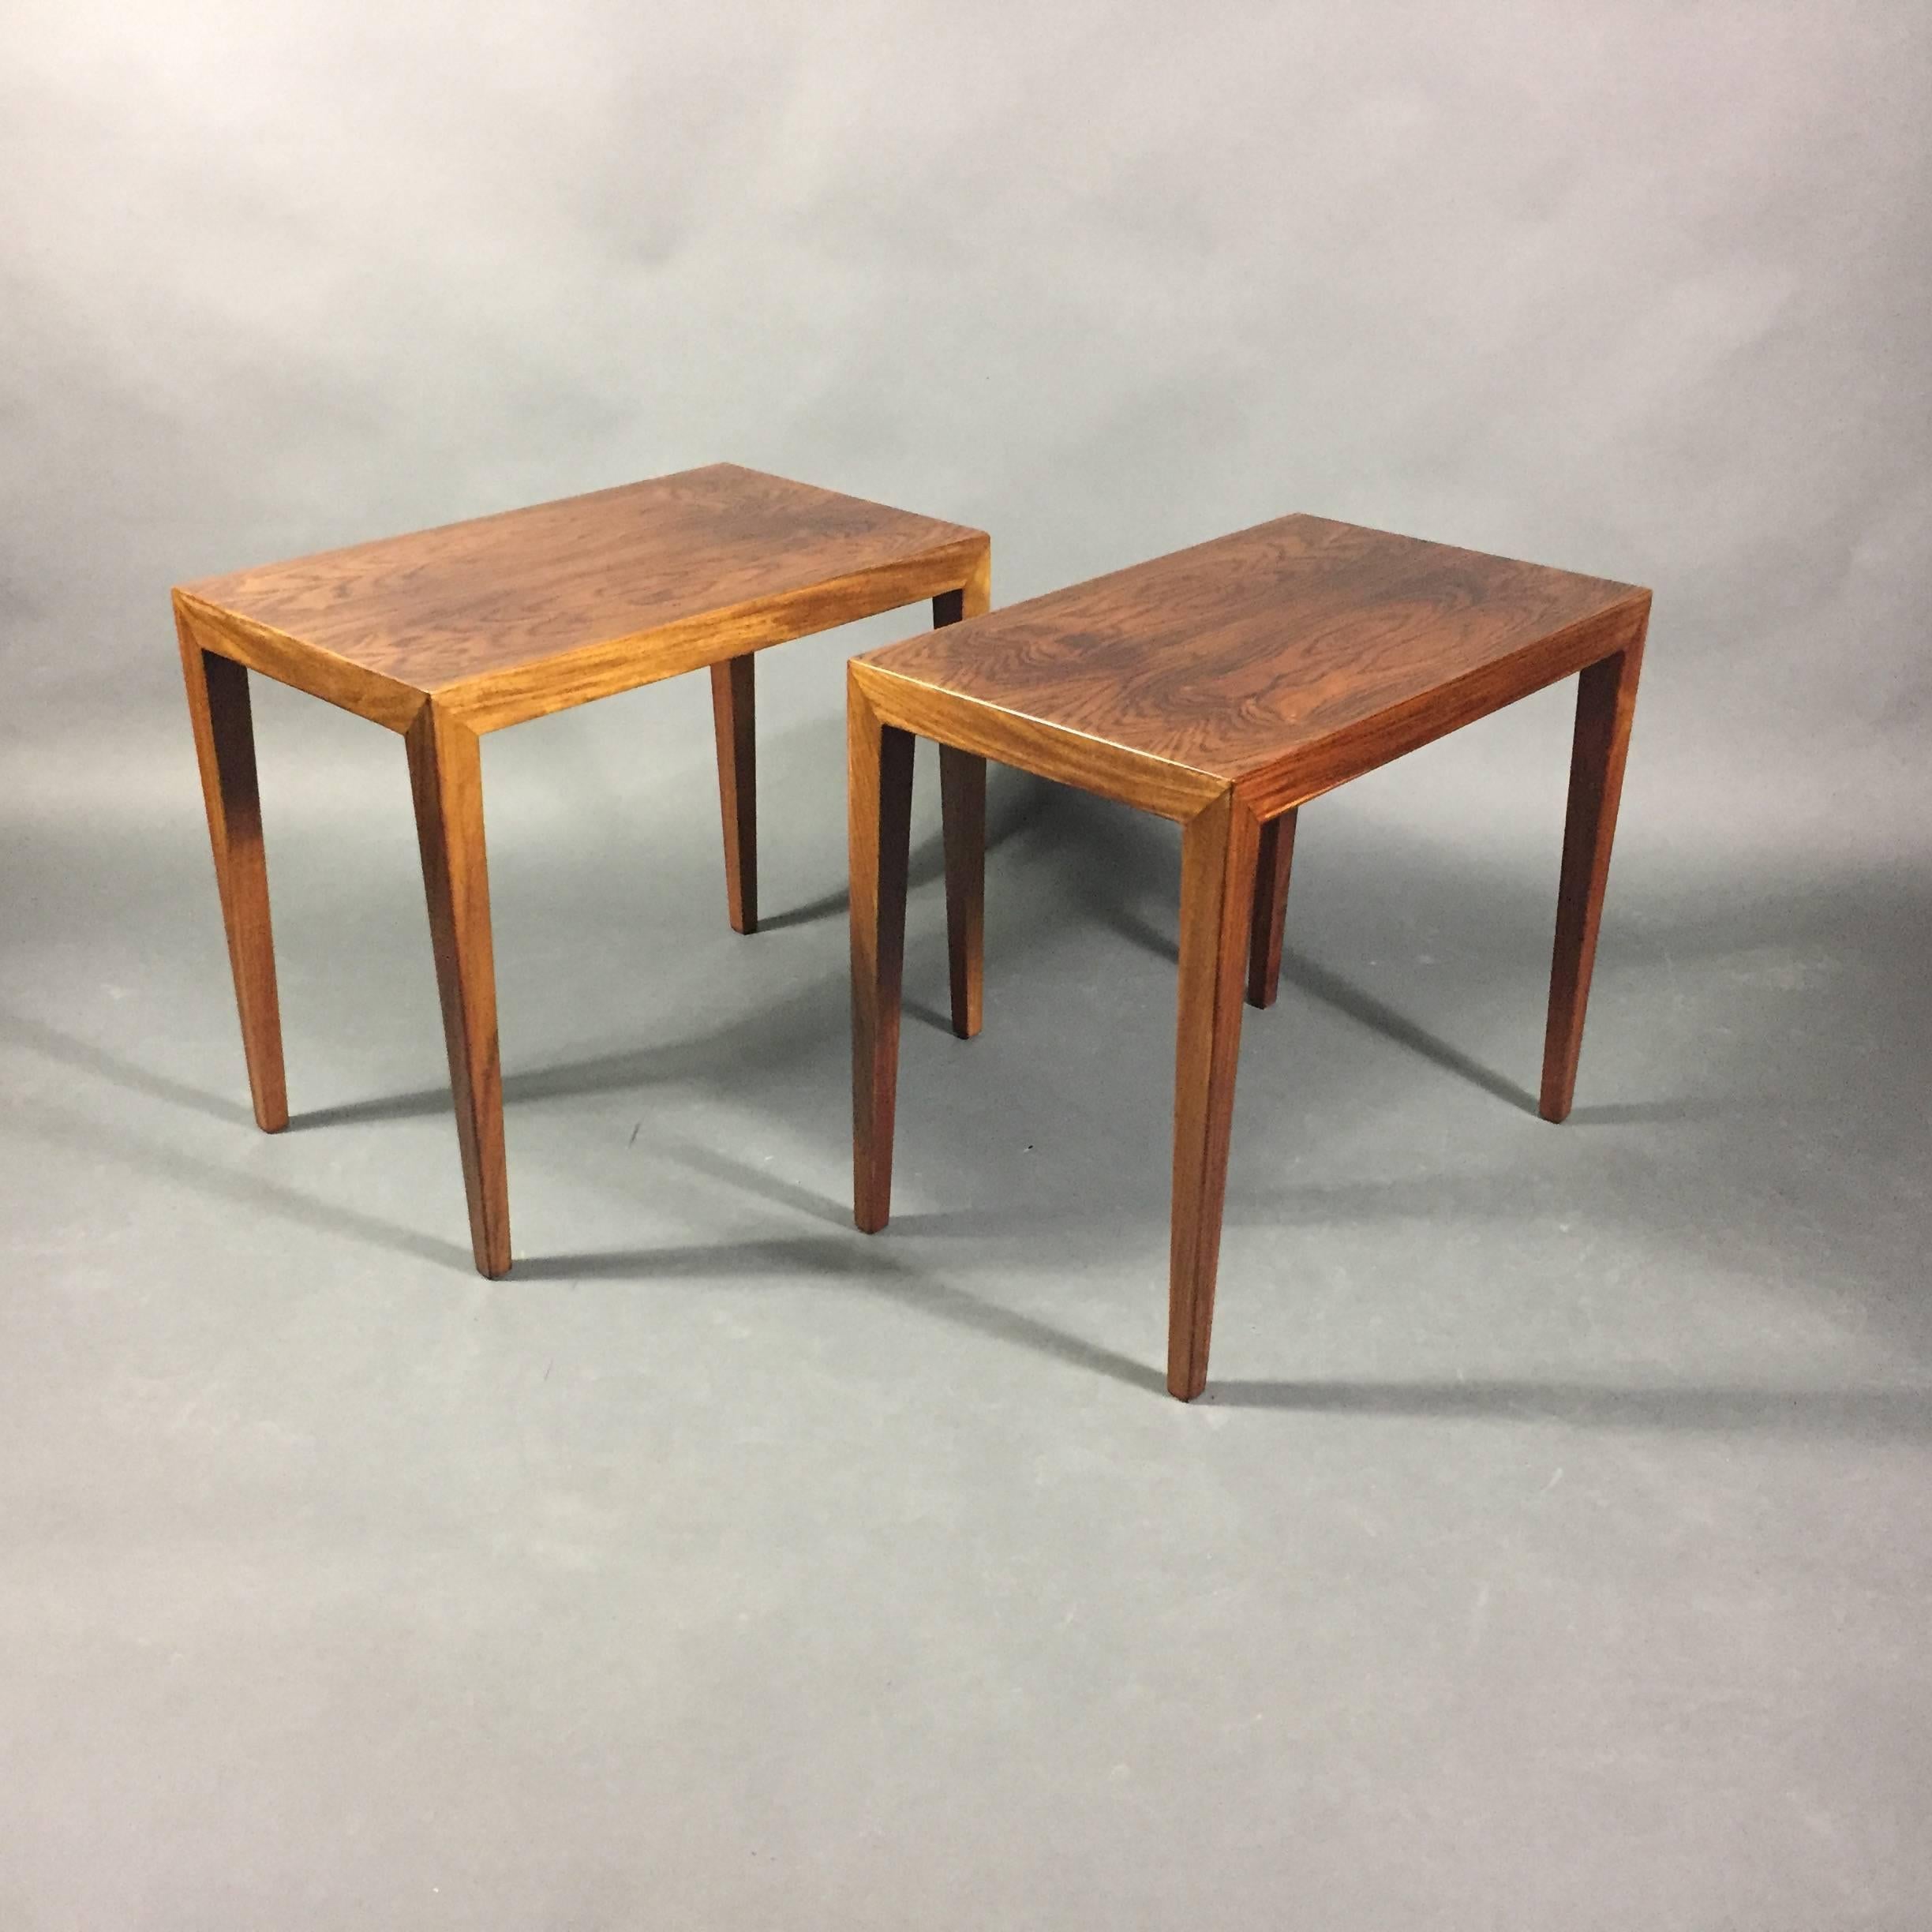 A beautiful pair of refined end tables in a deep Brazilian rosewood with tapered legs and an elegant thin-edge tabletop. Made by Haslev Møbelsnedkeri with exact precision expected from their high level of craftsmanship, Denmark, 1960s. Danish